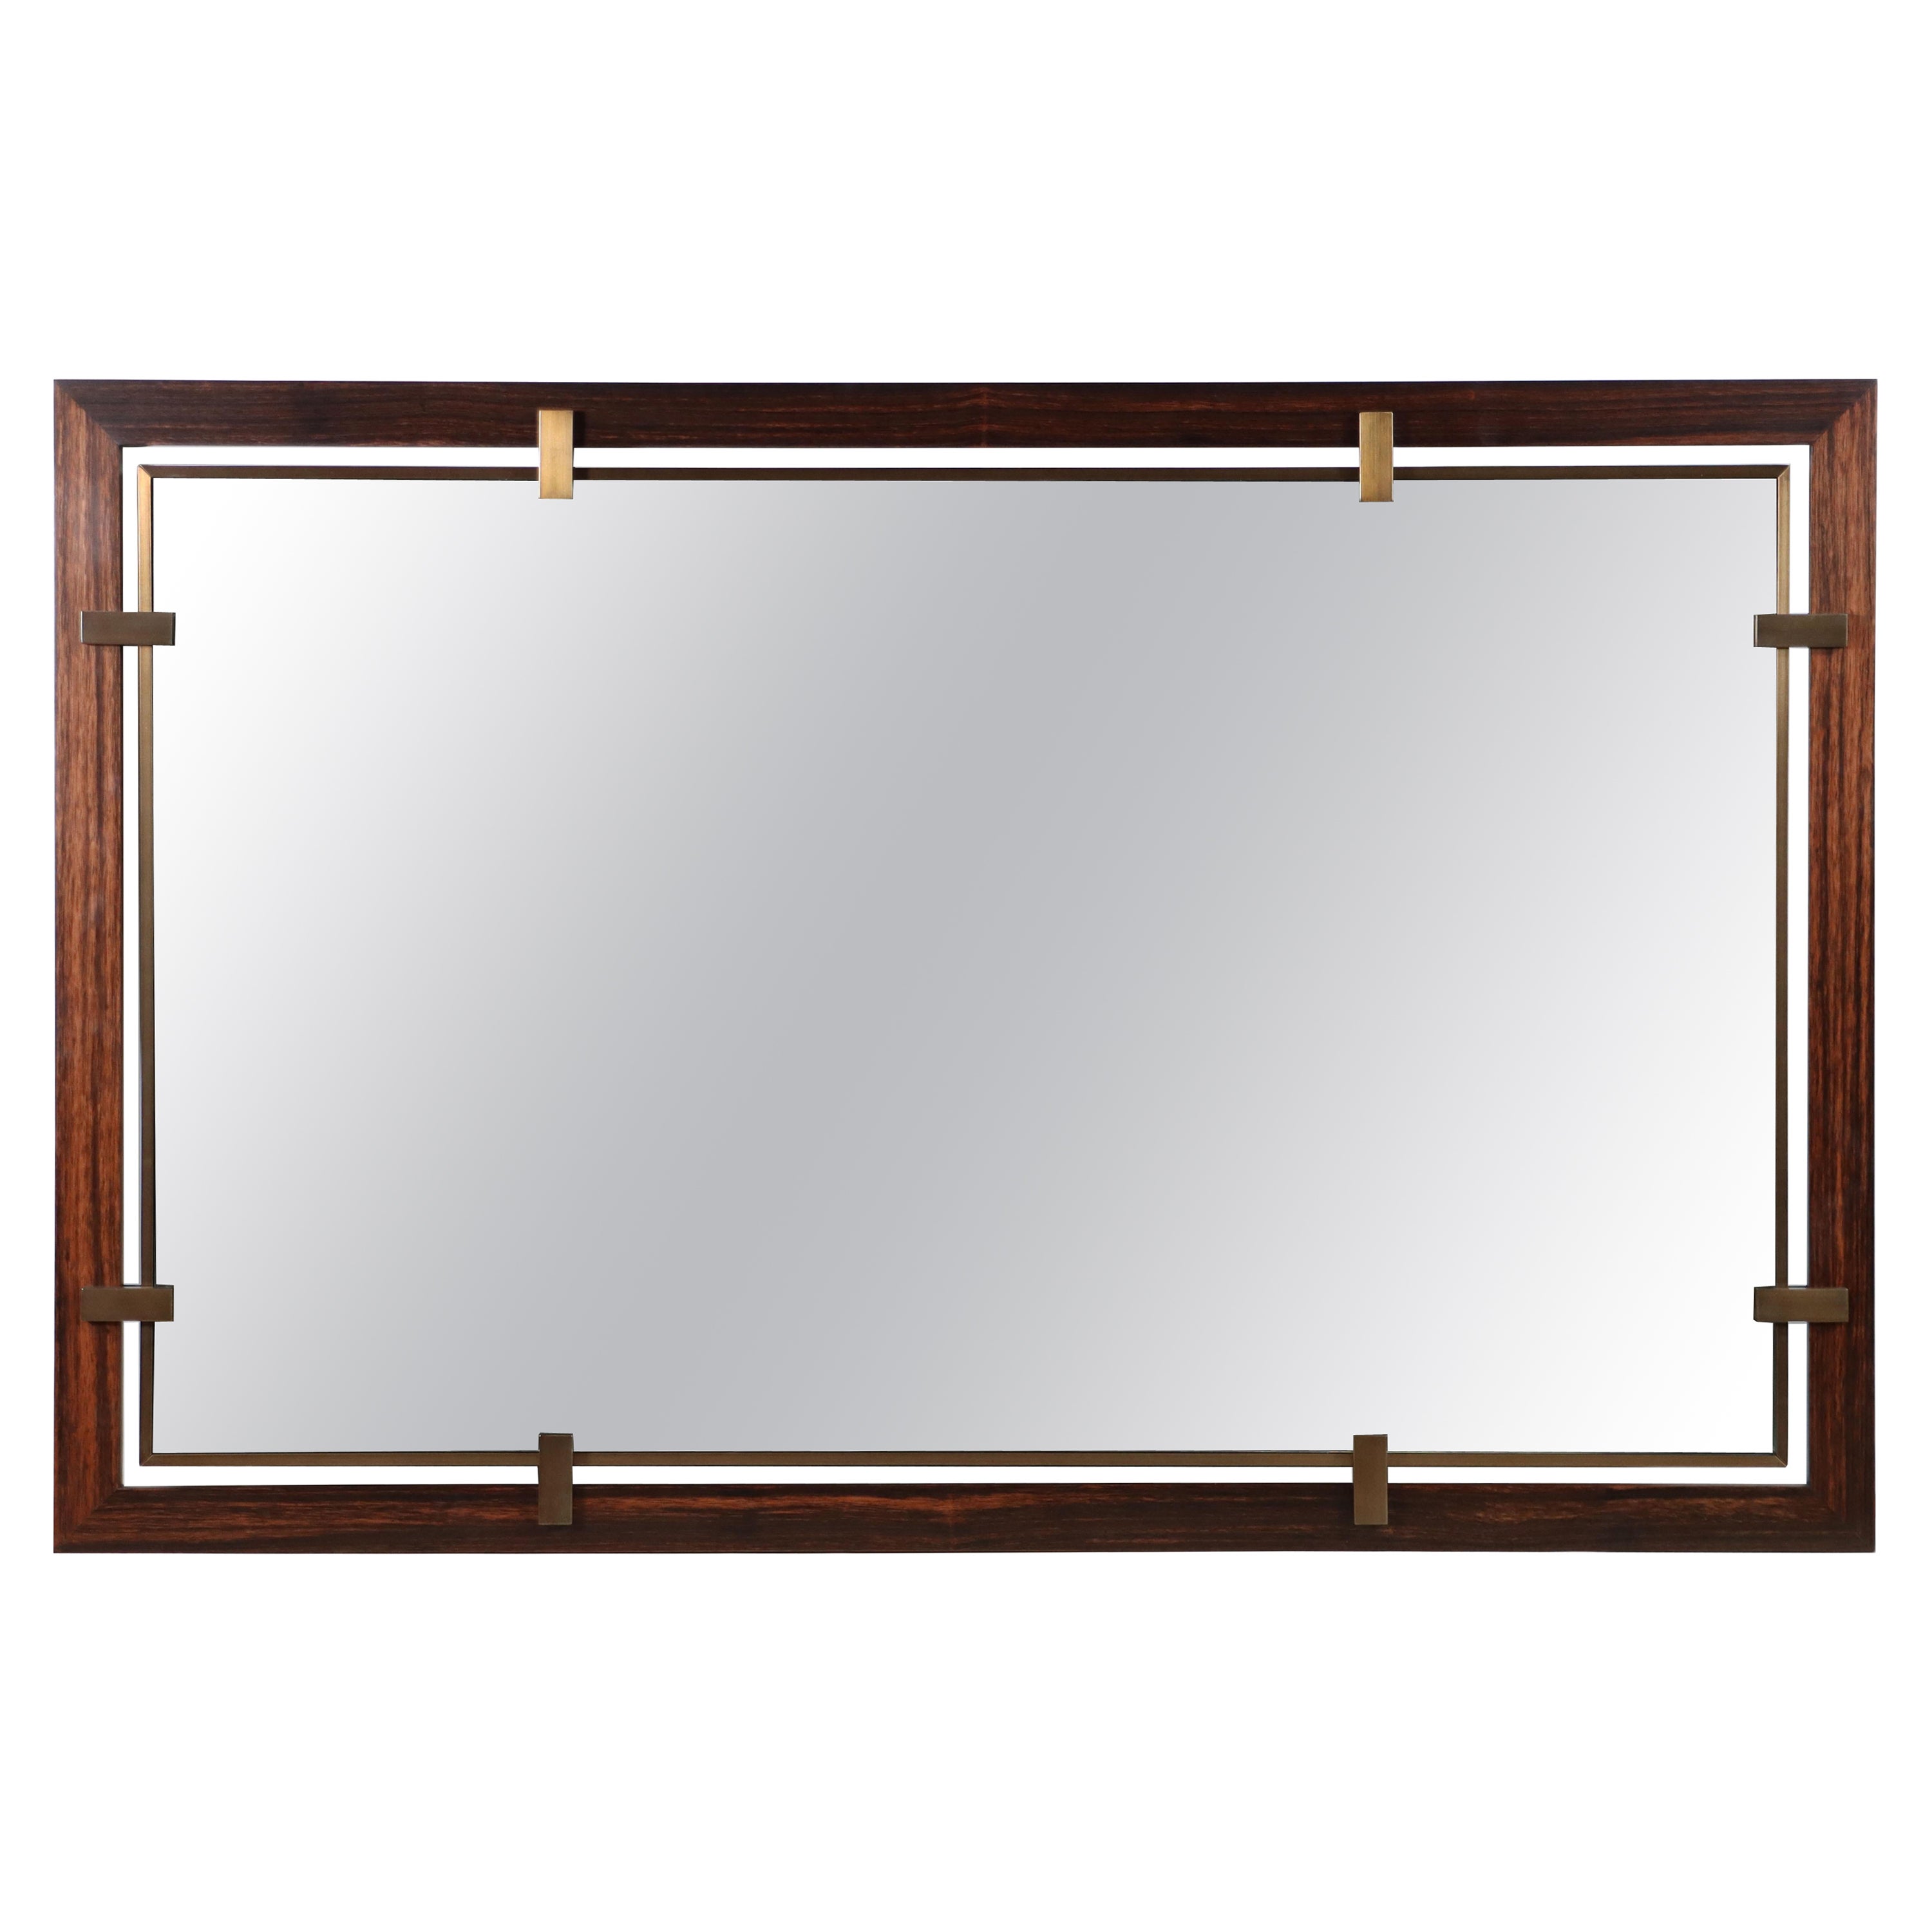 Bronze and Macassar Ebony Floating Frame Modern Wall Mirror by Costantini, Marco For Sale